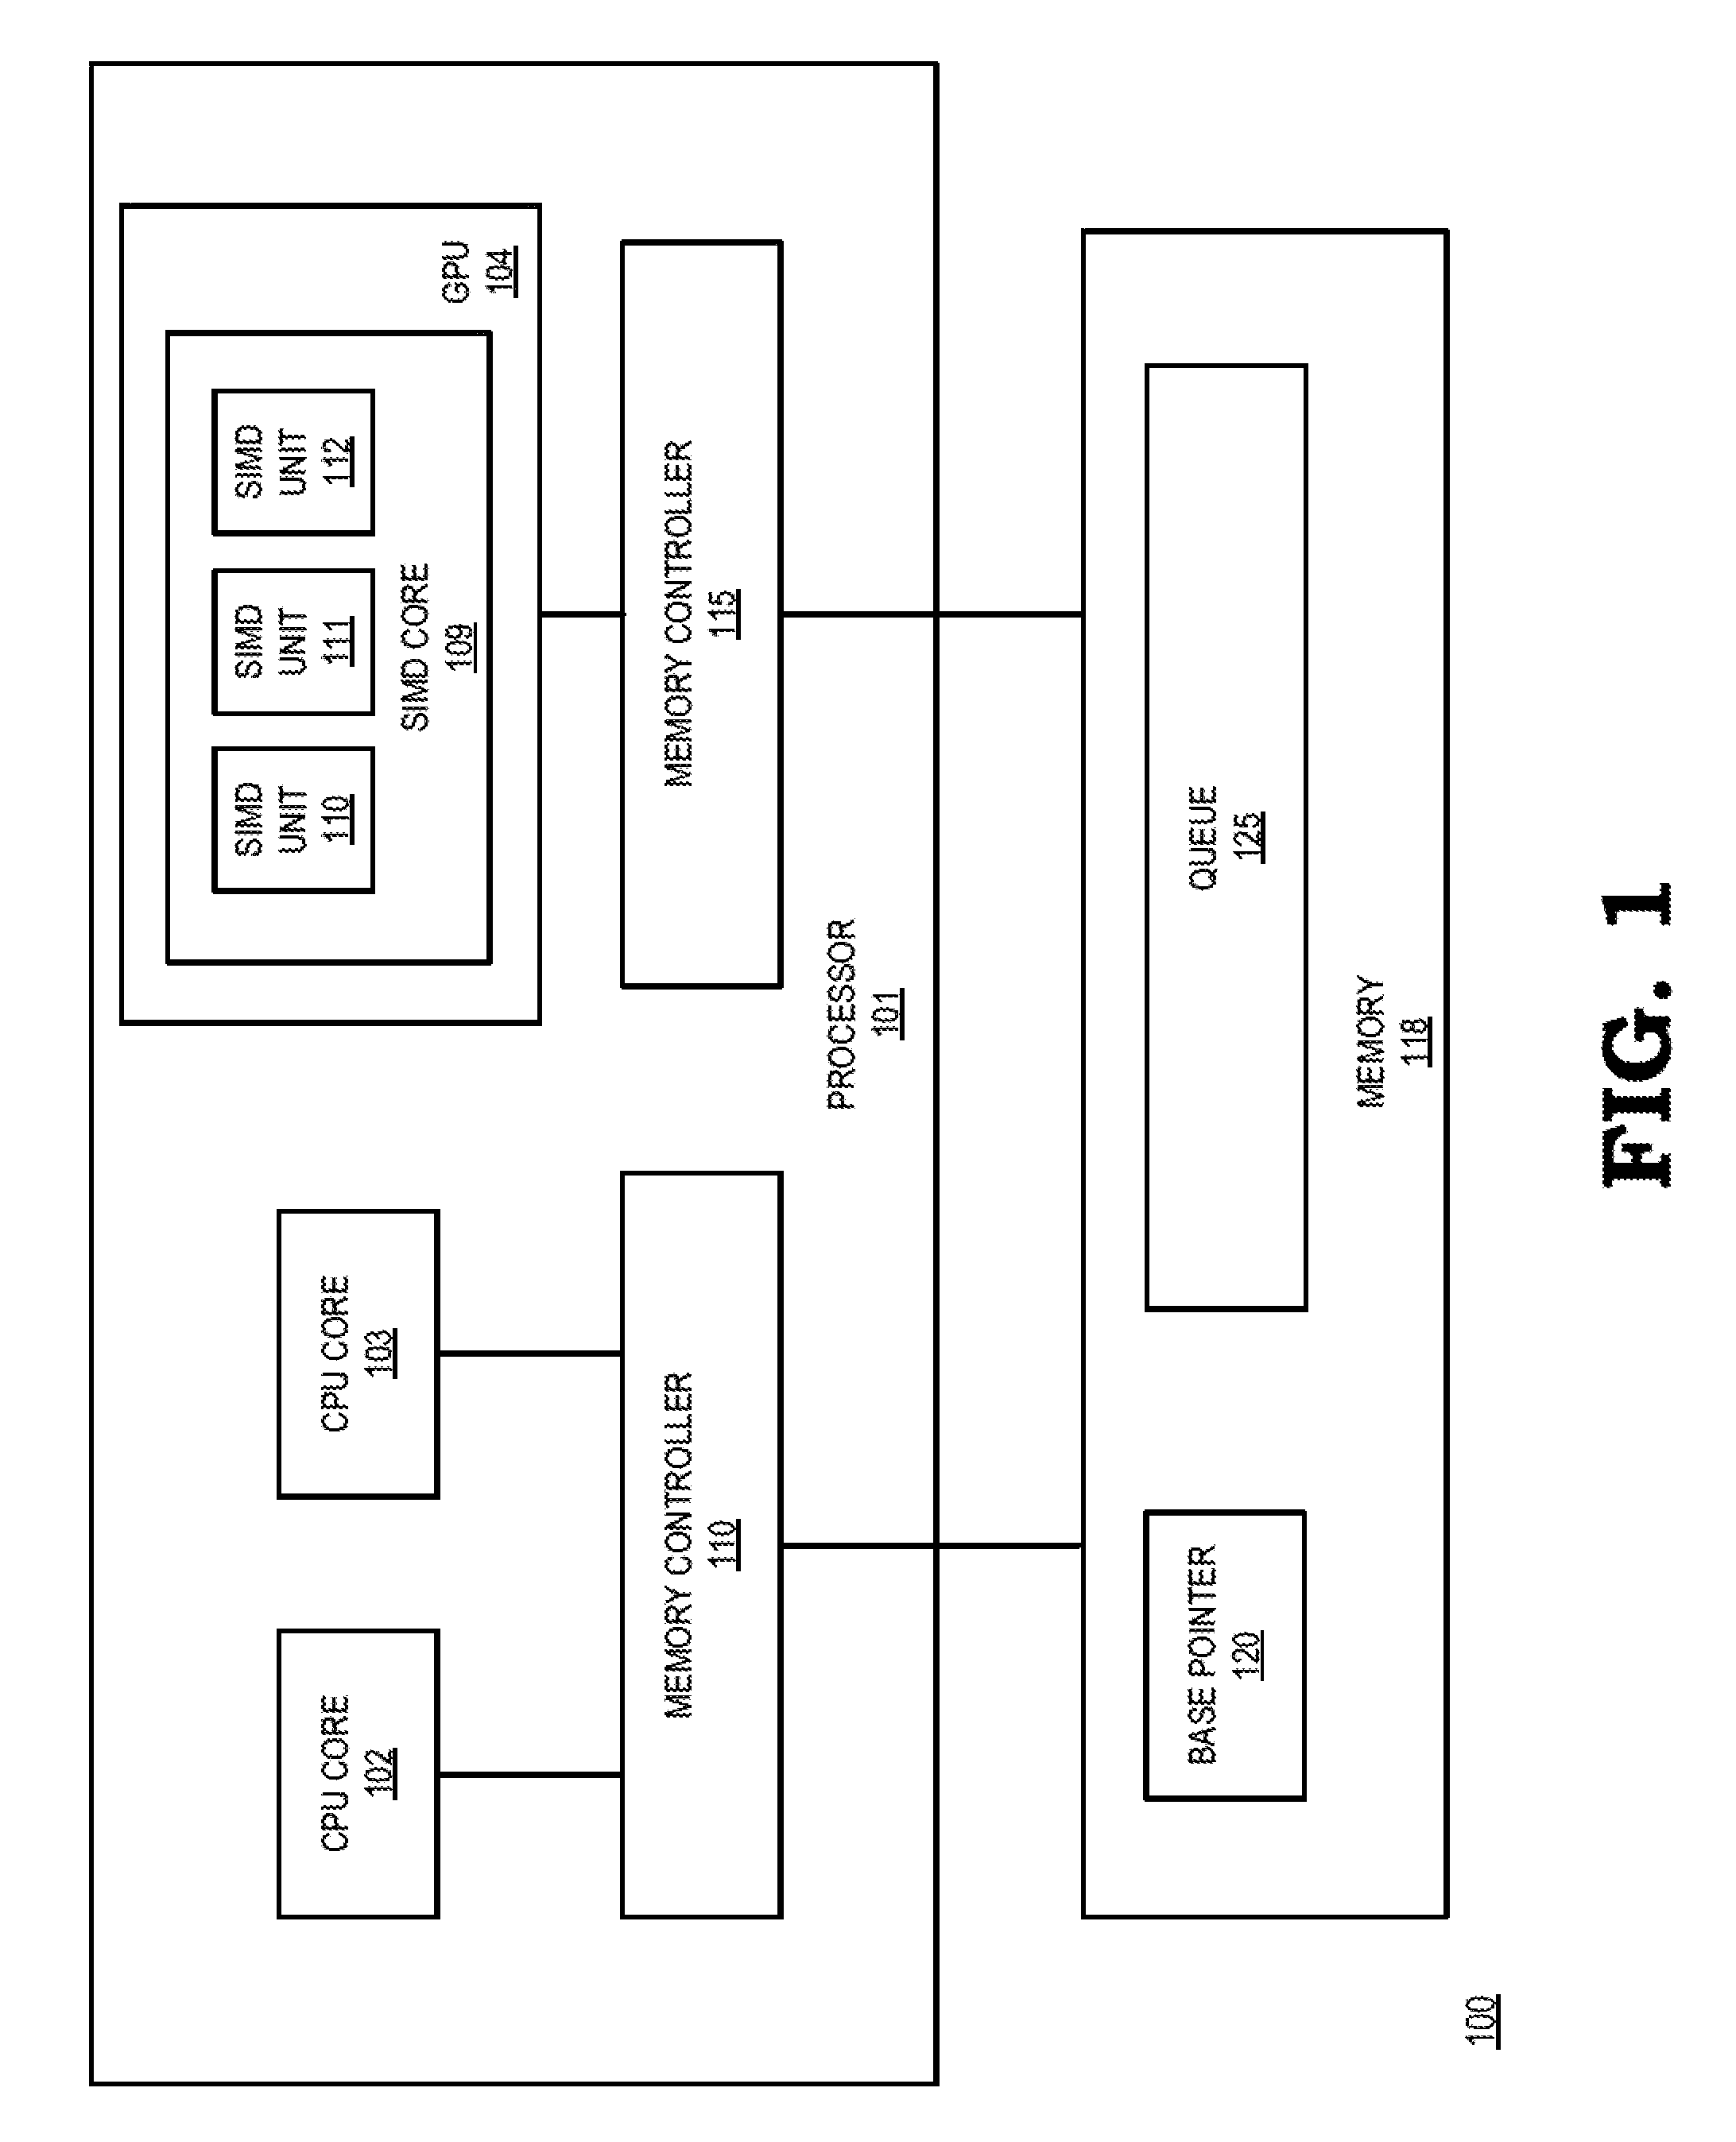 Conditional atomic operations at a processor